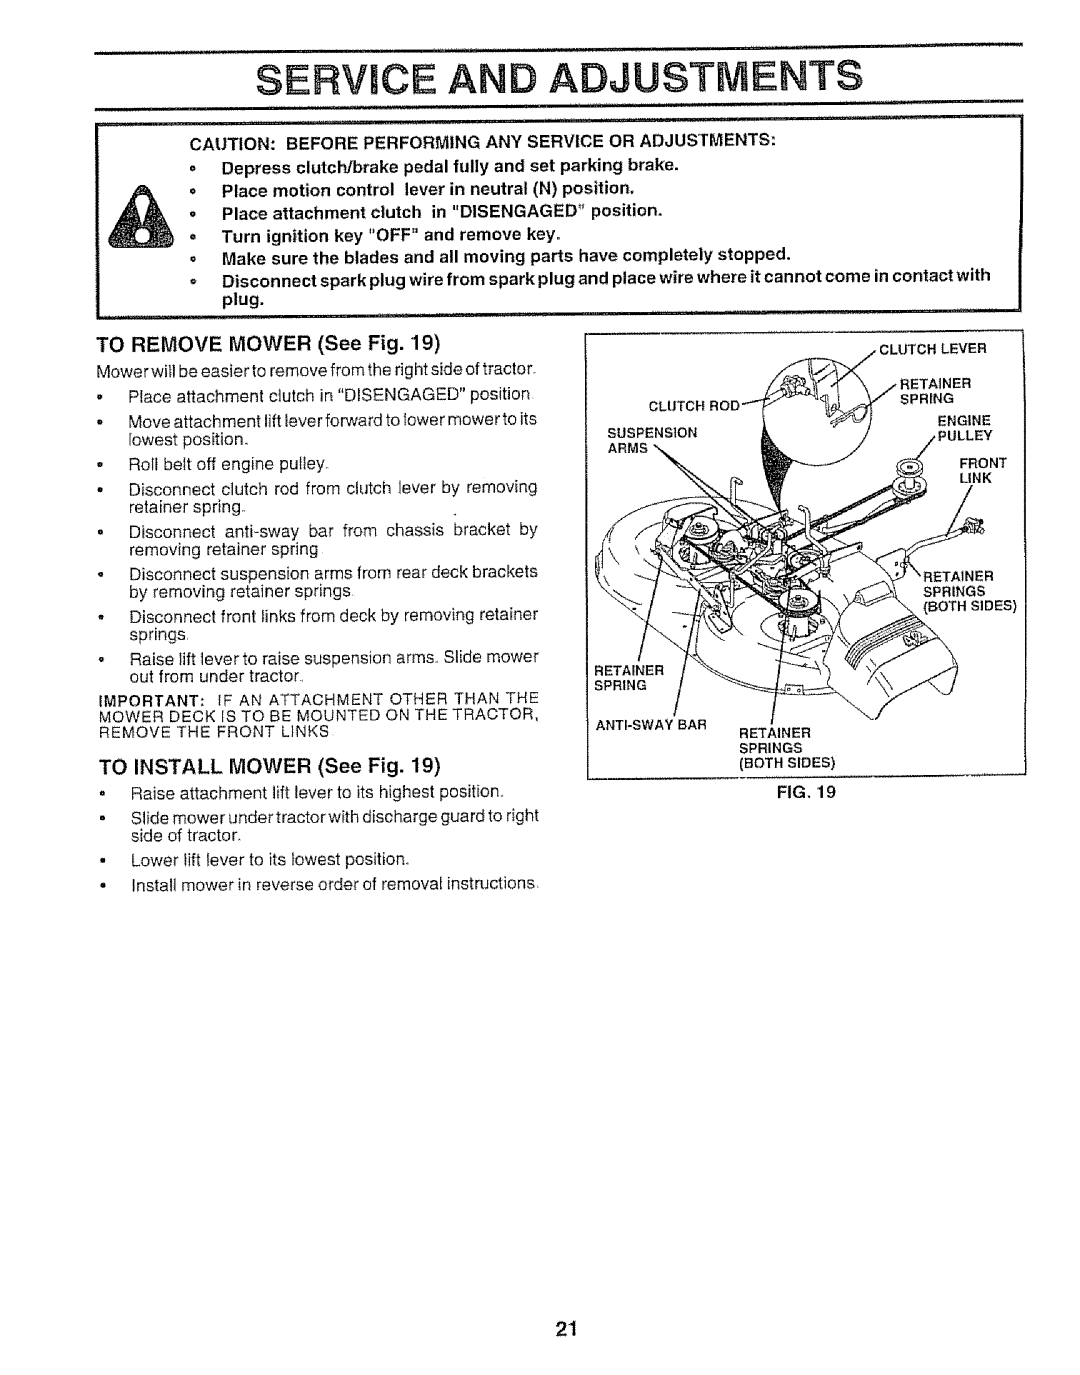 Craftsman 917.259592 owner manual Servuce And Adjustments, TO REMOVE MOWER See Fig, TO INSTALL MOWER See Fig 